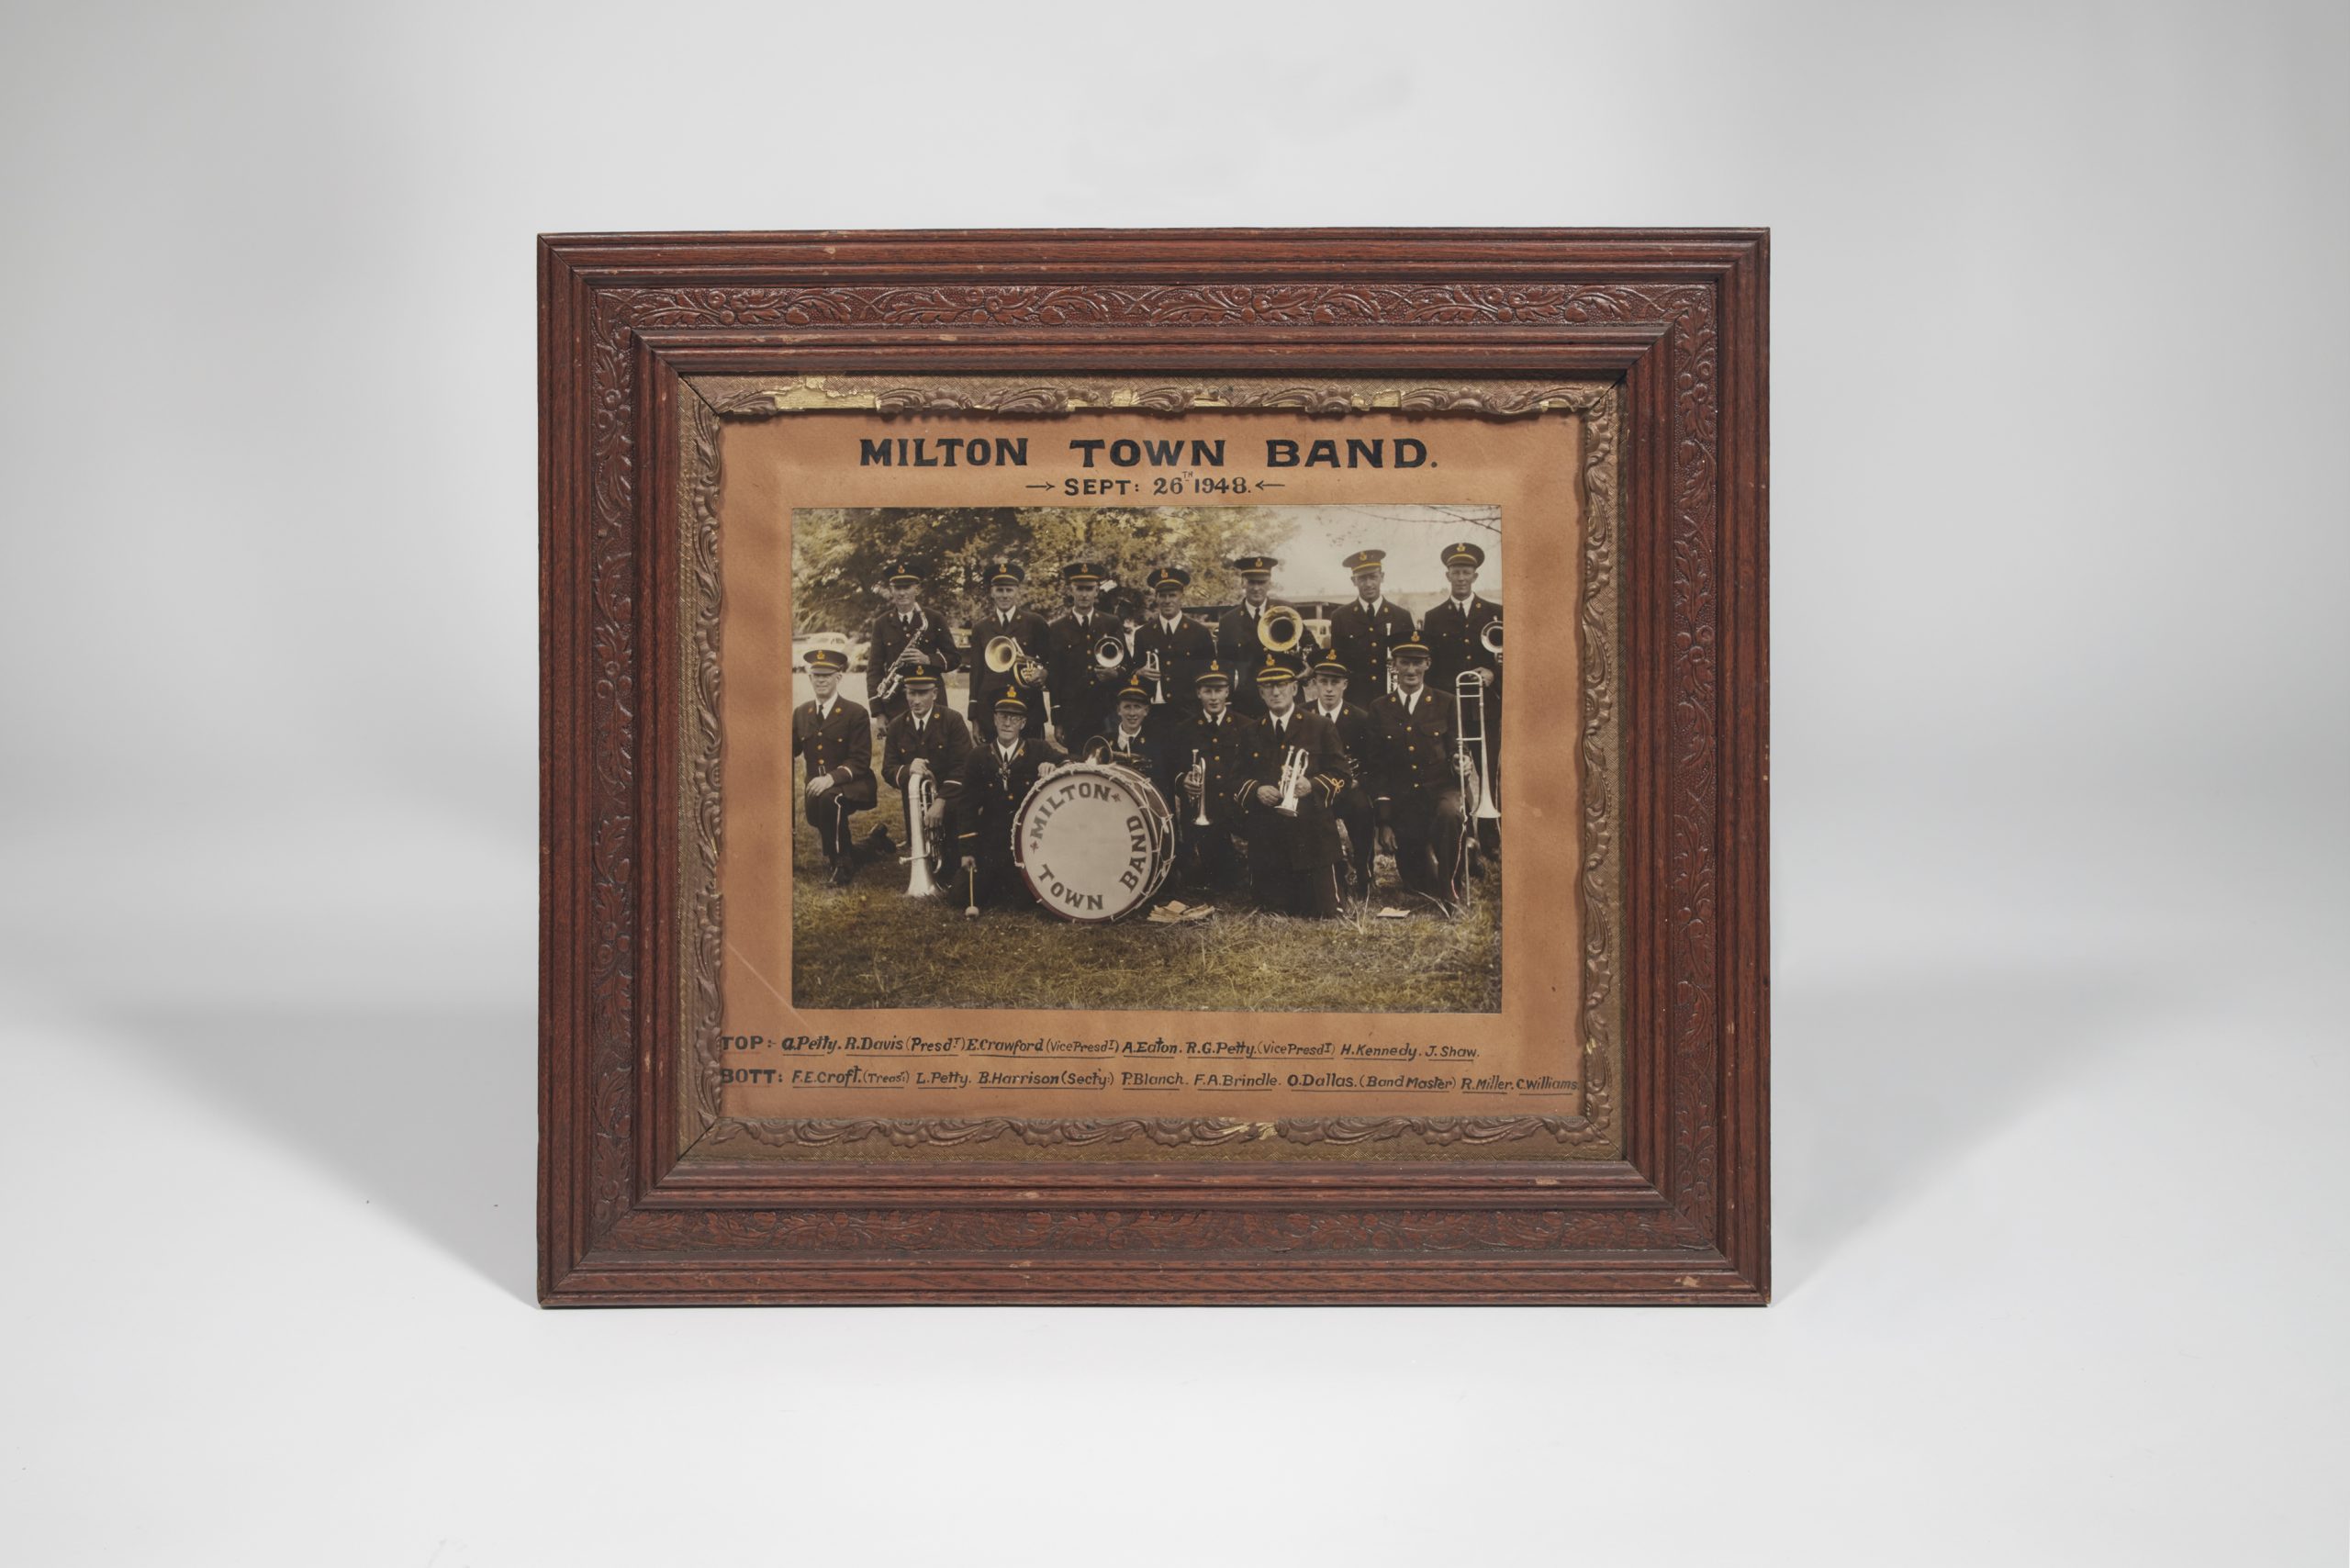 Framed photograph of the Milton Town Band in 1948, including a bass drum front and centre